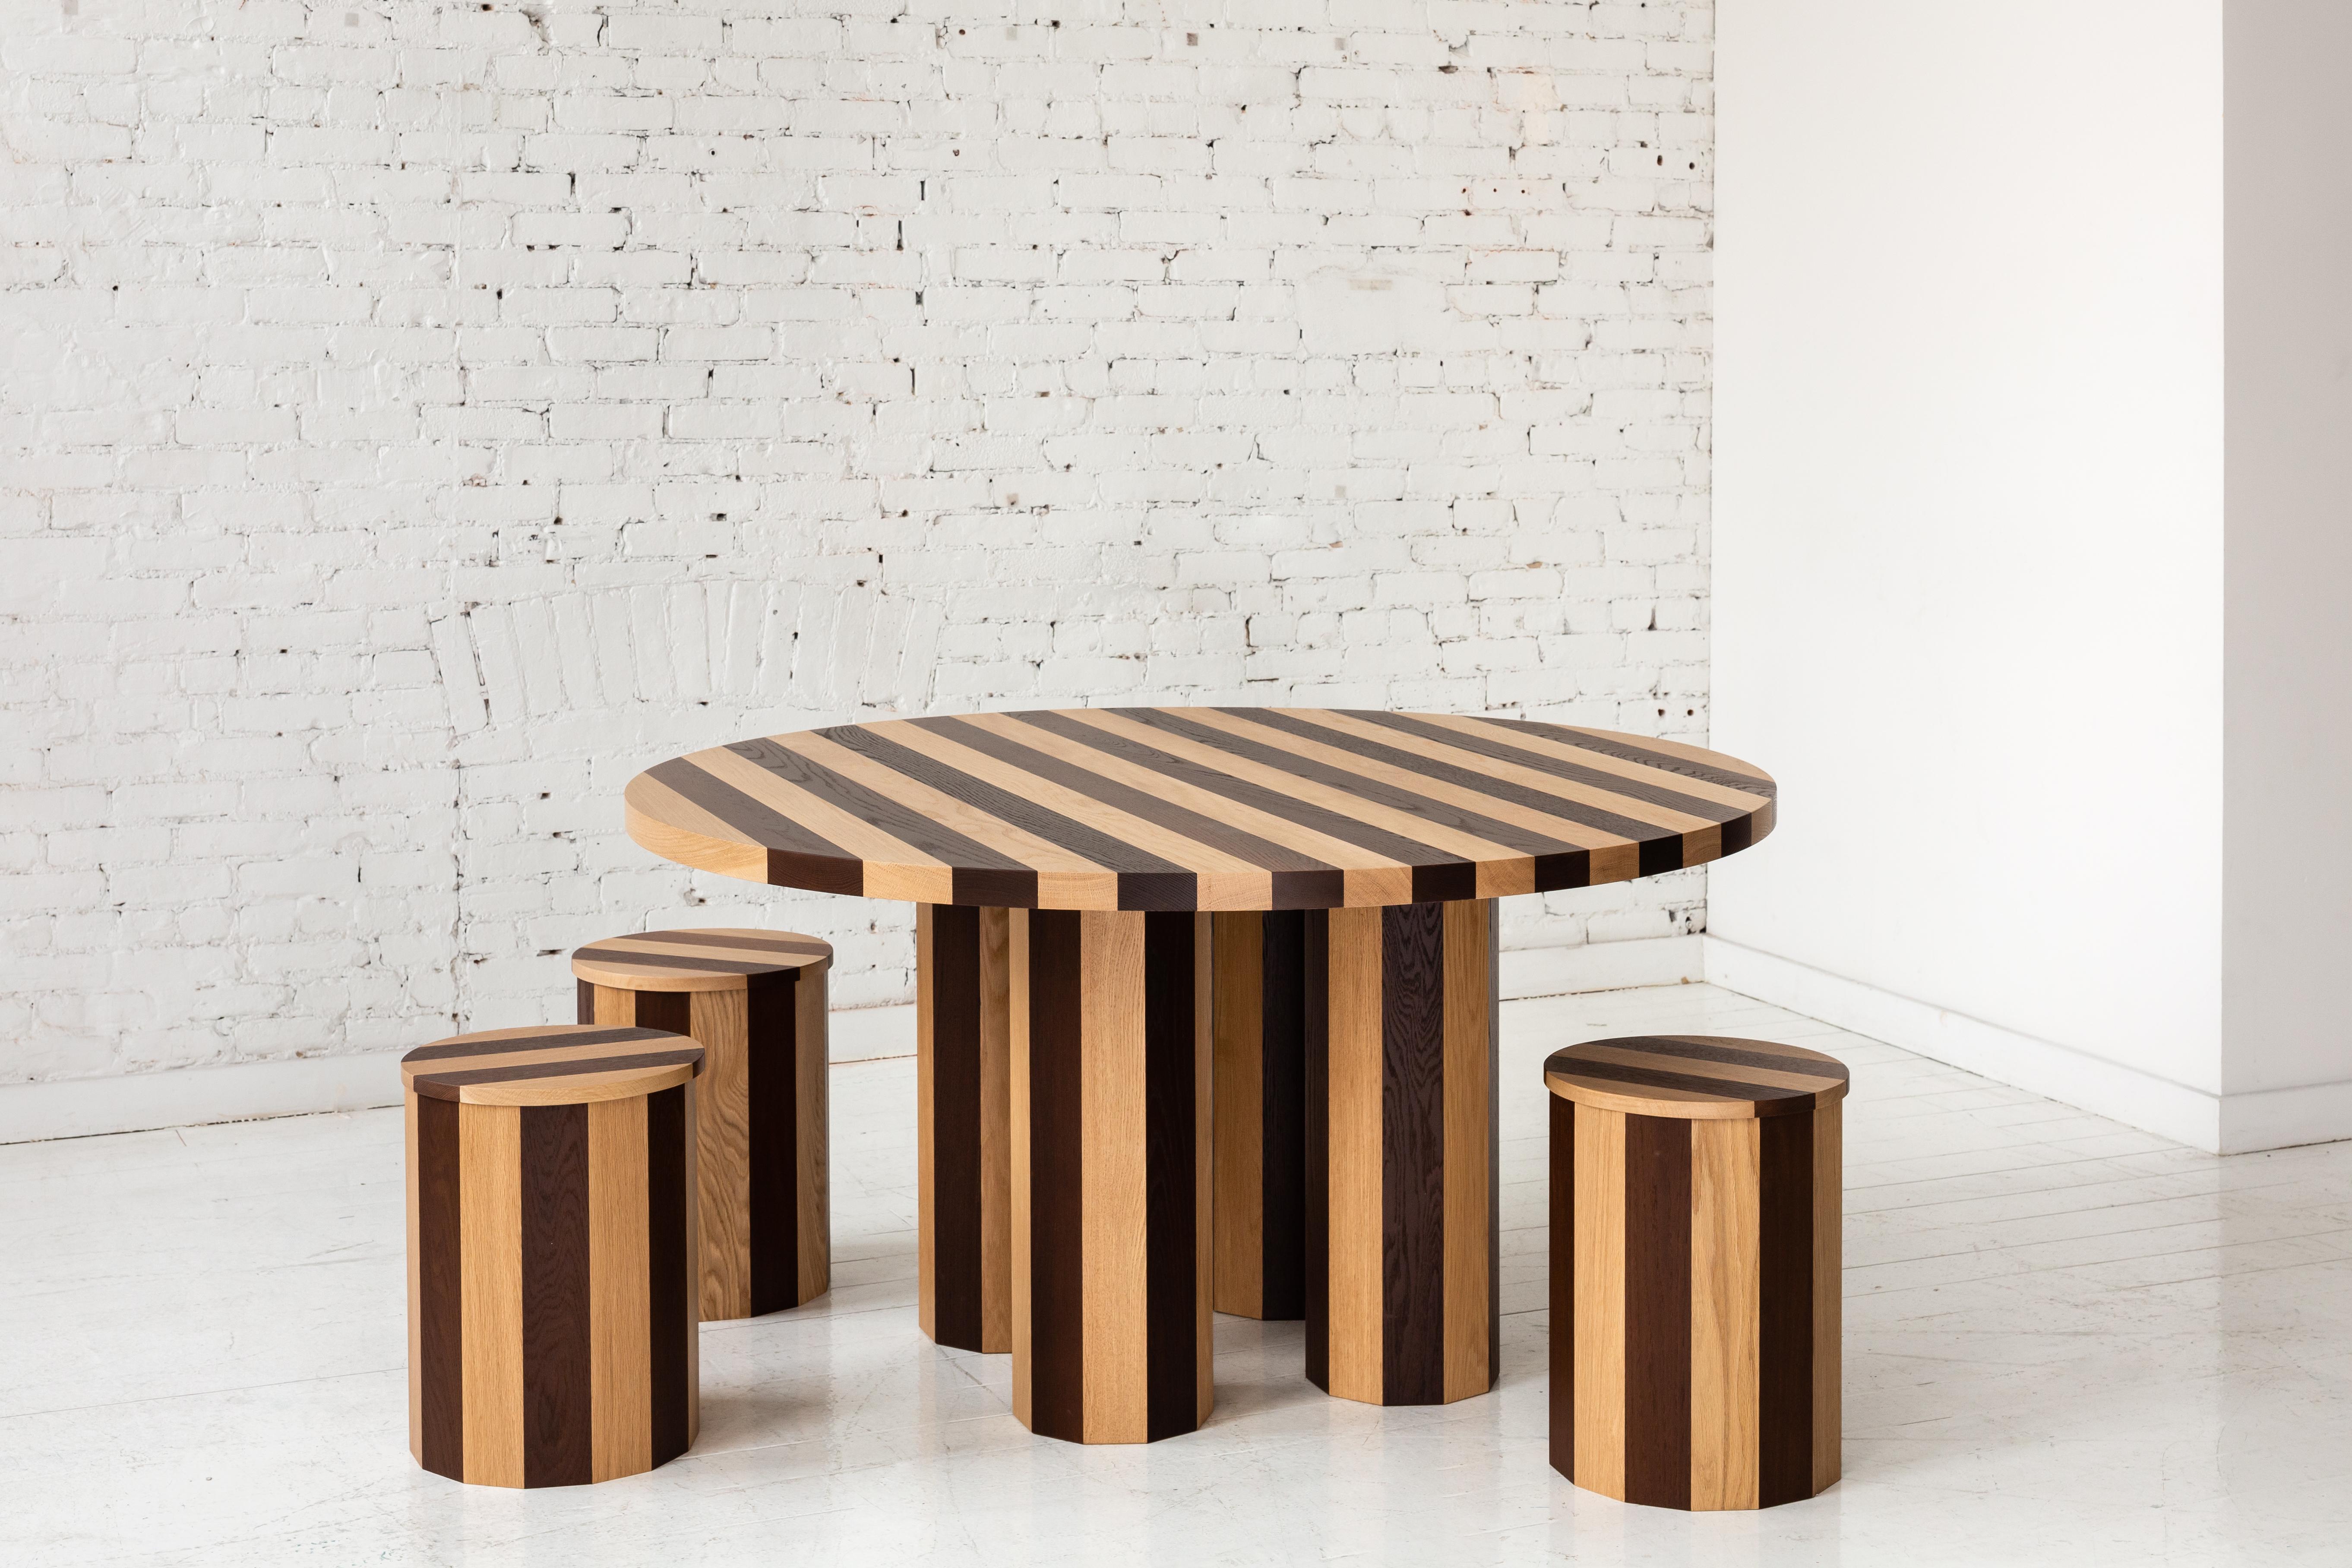 This table is a part of the new Cooperage Dining collection. Each piece features large faceted round elements that with its namesake reference the traditional cooper's trade of making barrels.

The round dining table is shown in a bold palette of